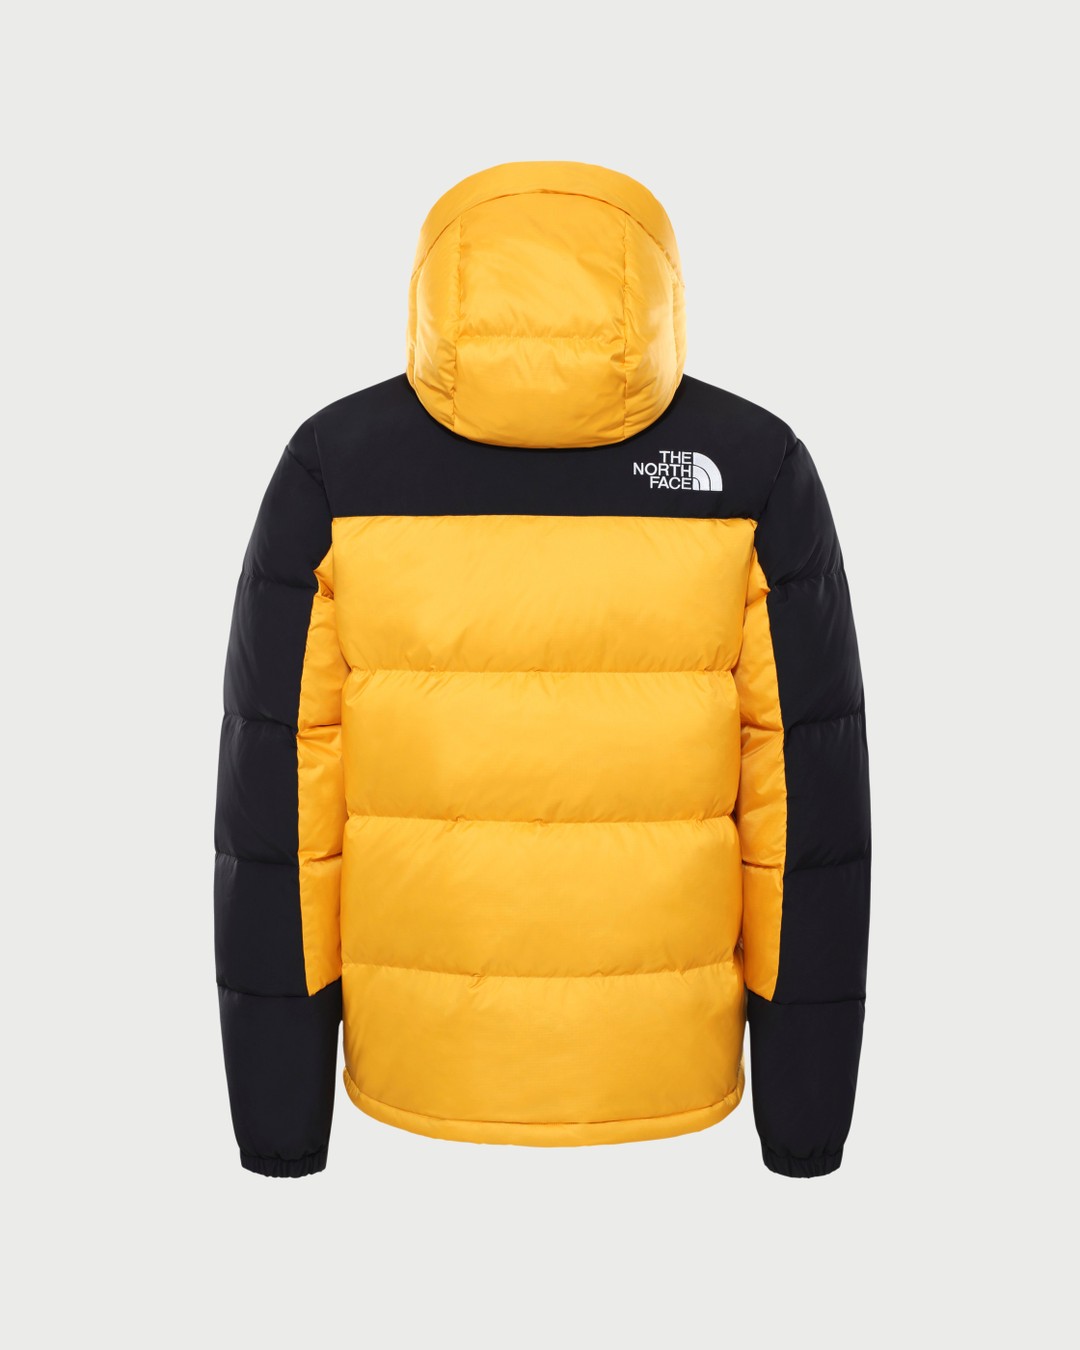 The North Face – Himalayan Down Jacket Peak Summit Gold Unisex - Outerwear - Yellow - Image 2